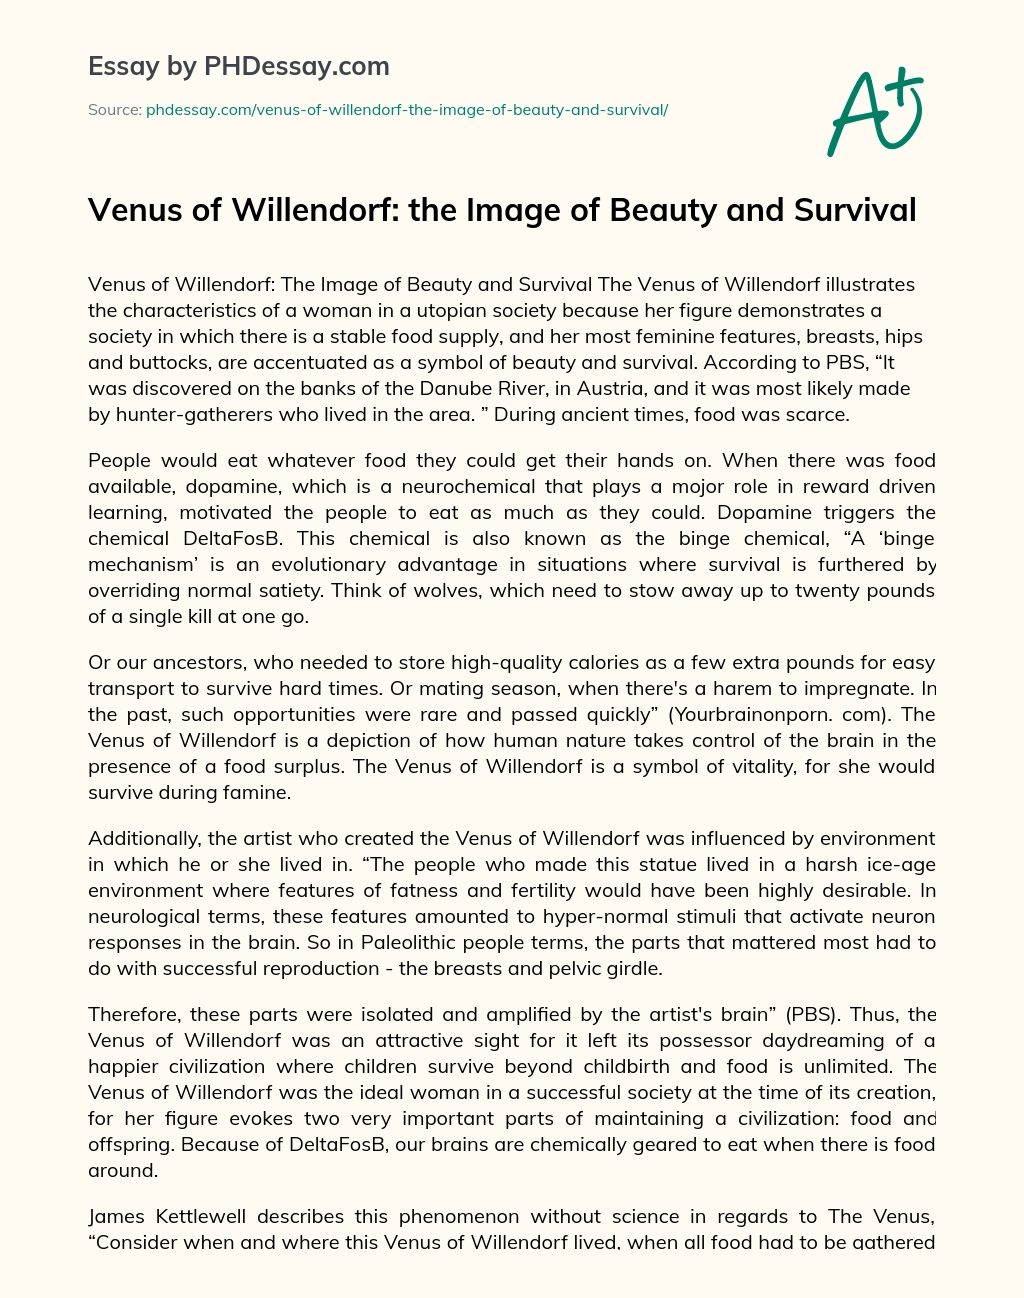 Venus of Willendorf: the Image of Beauty and Survival essay